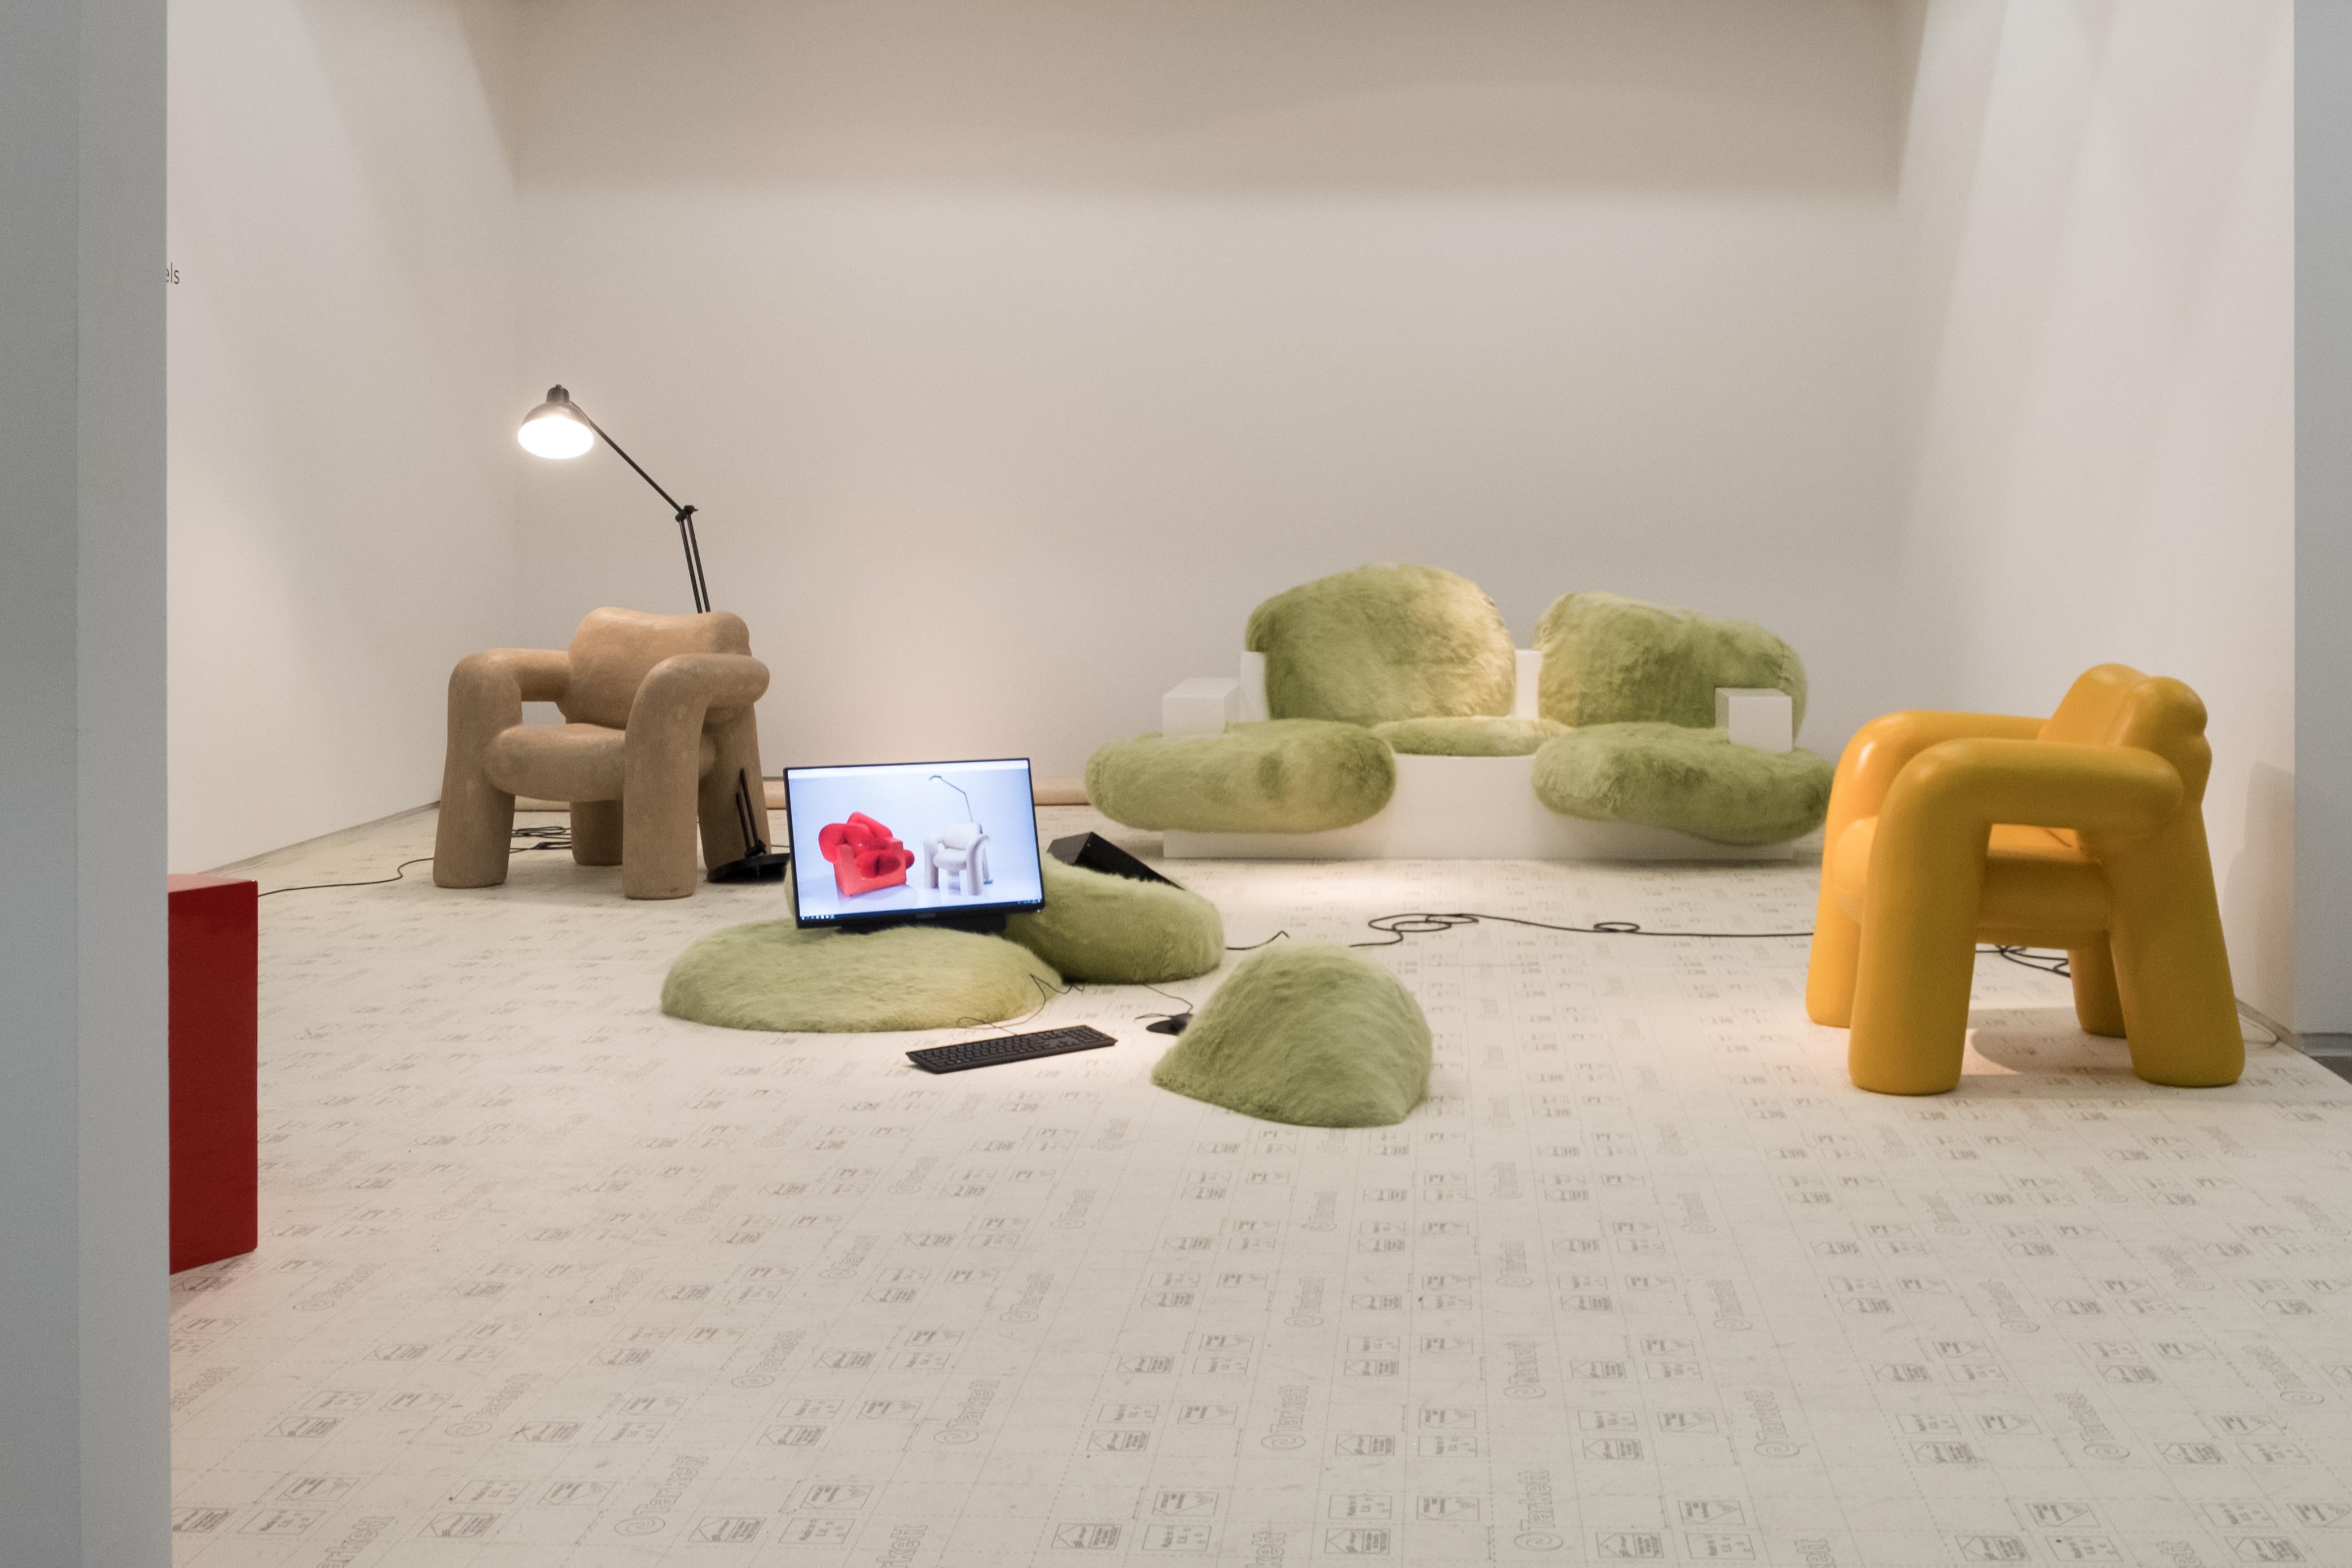 'Pillow Computer' by Schimmel & Schweikle for alfa.brussels 2